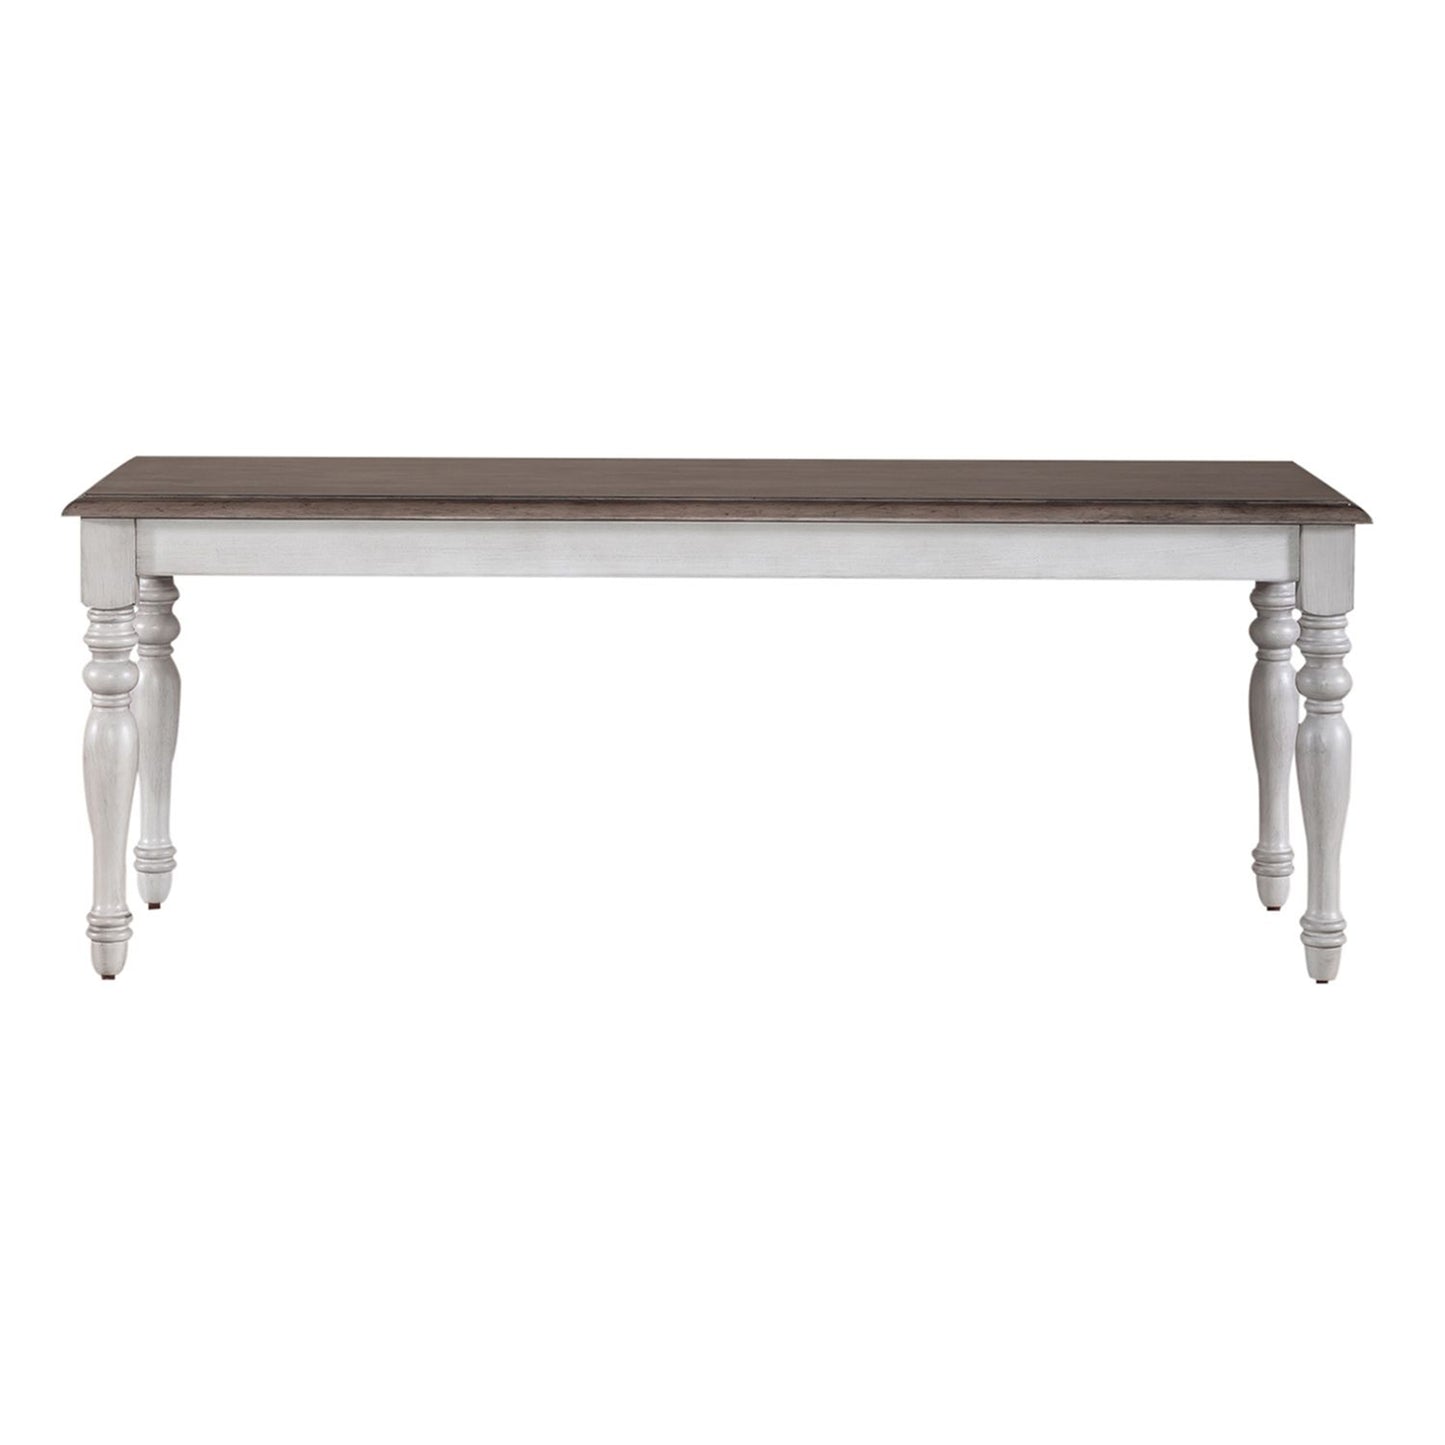 Chandria Solid Wood Bench - Antique White and Weathered Pine Finish